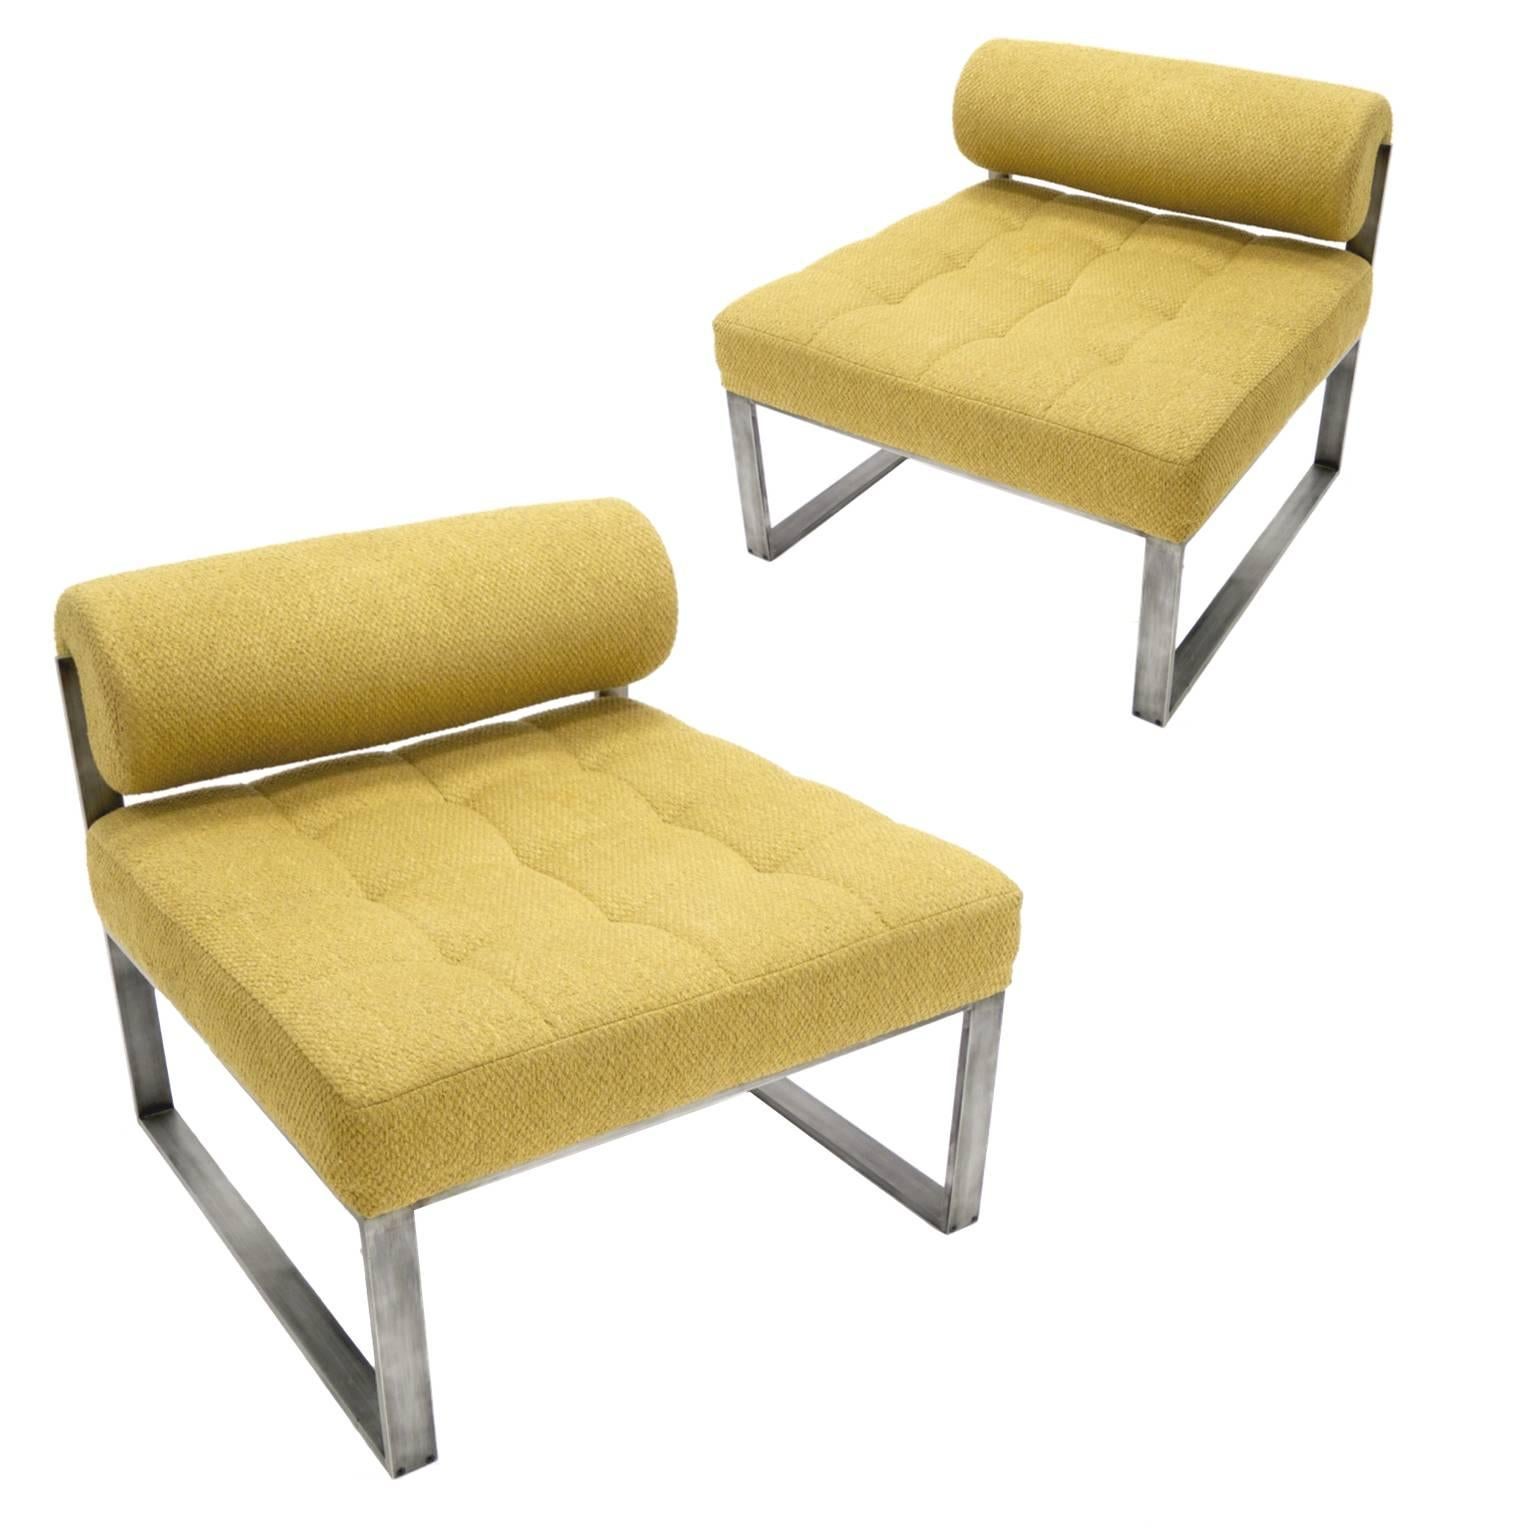 Stunning pair of original bolster back lounge chairs with polished aluminum frames designed by Harvey Probber. Original oatmeal textured upholstery in a neutral tan color.